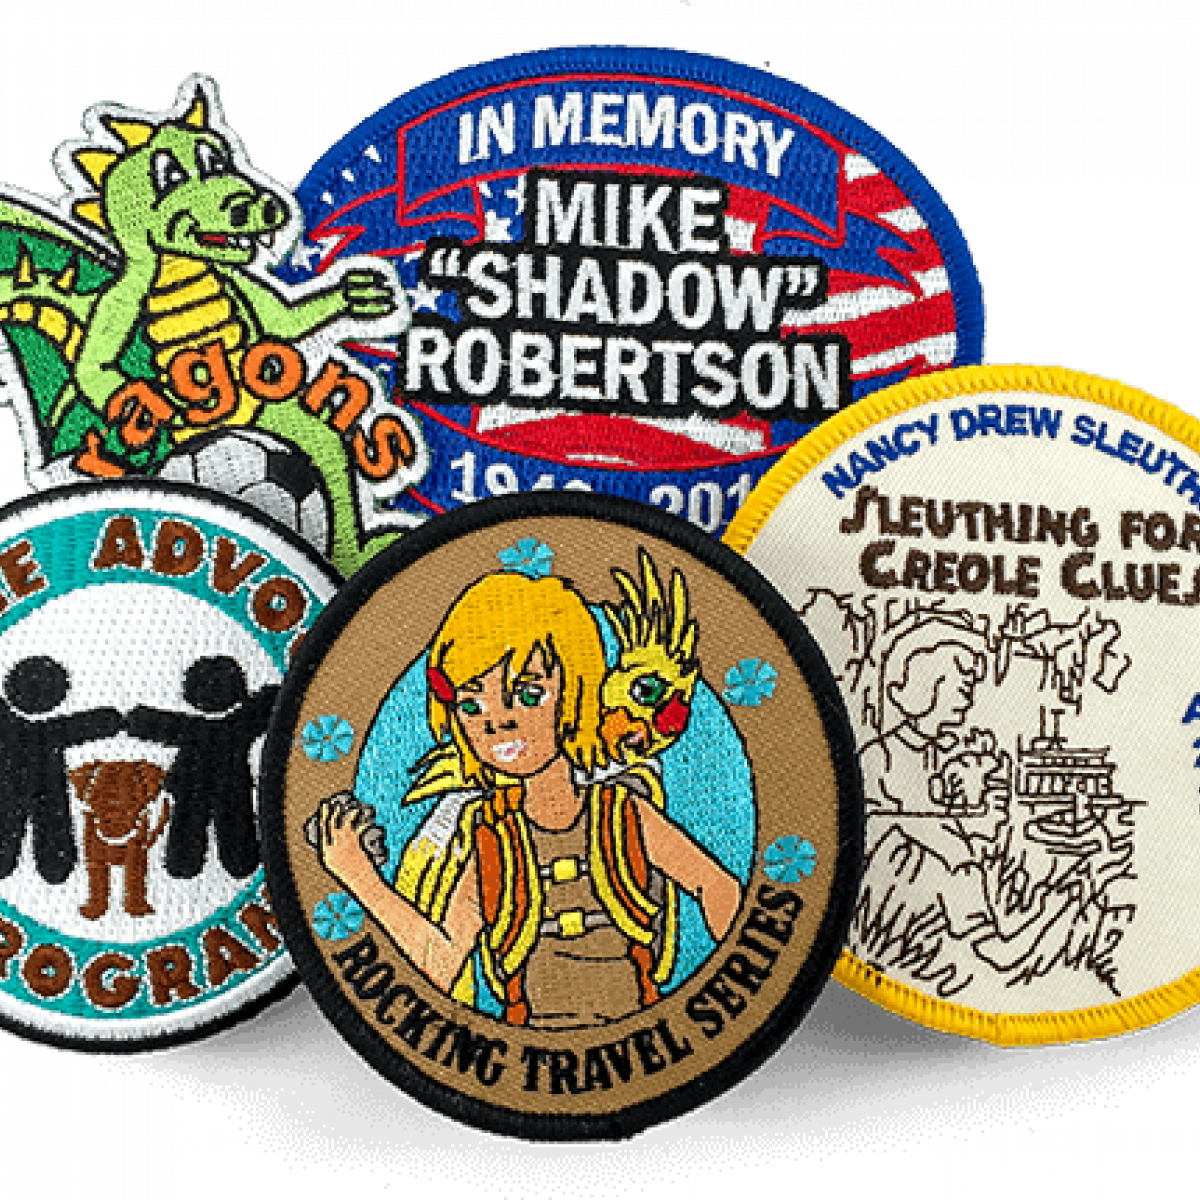 Five different embroidered patches, various shapes, sizes, colors, and designs